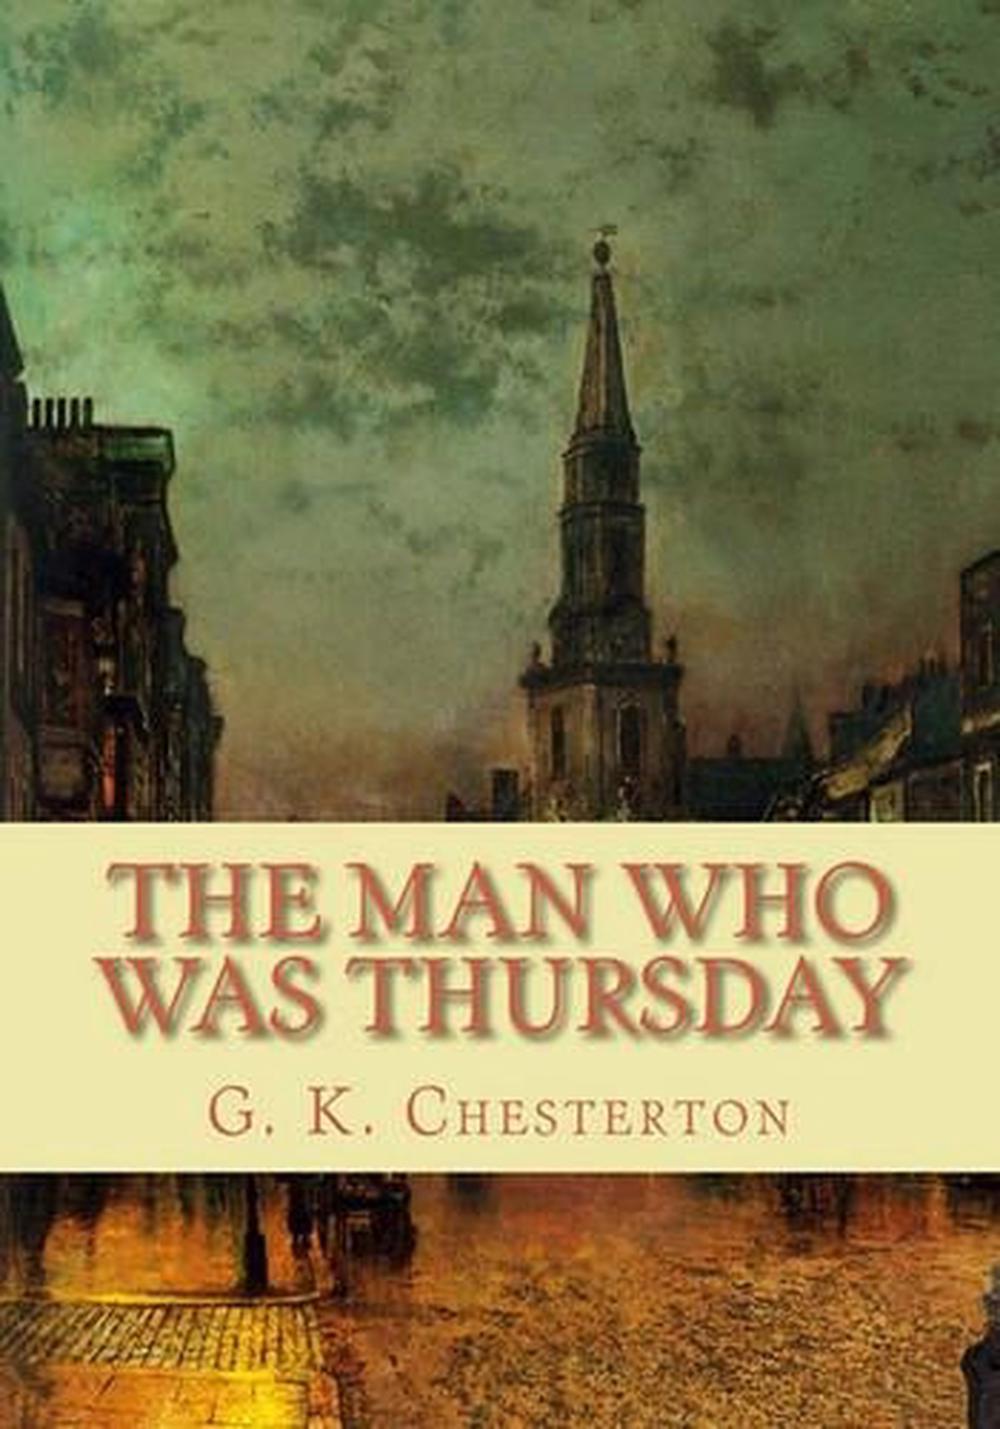 the man who was thursday book review